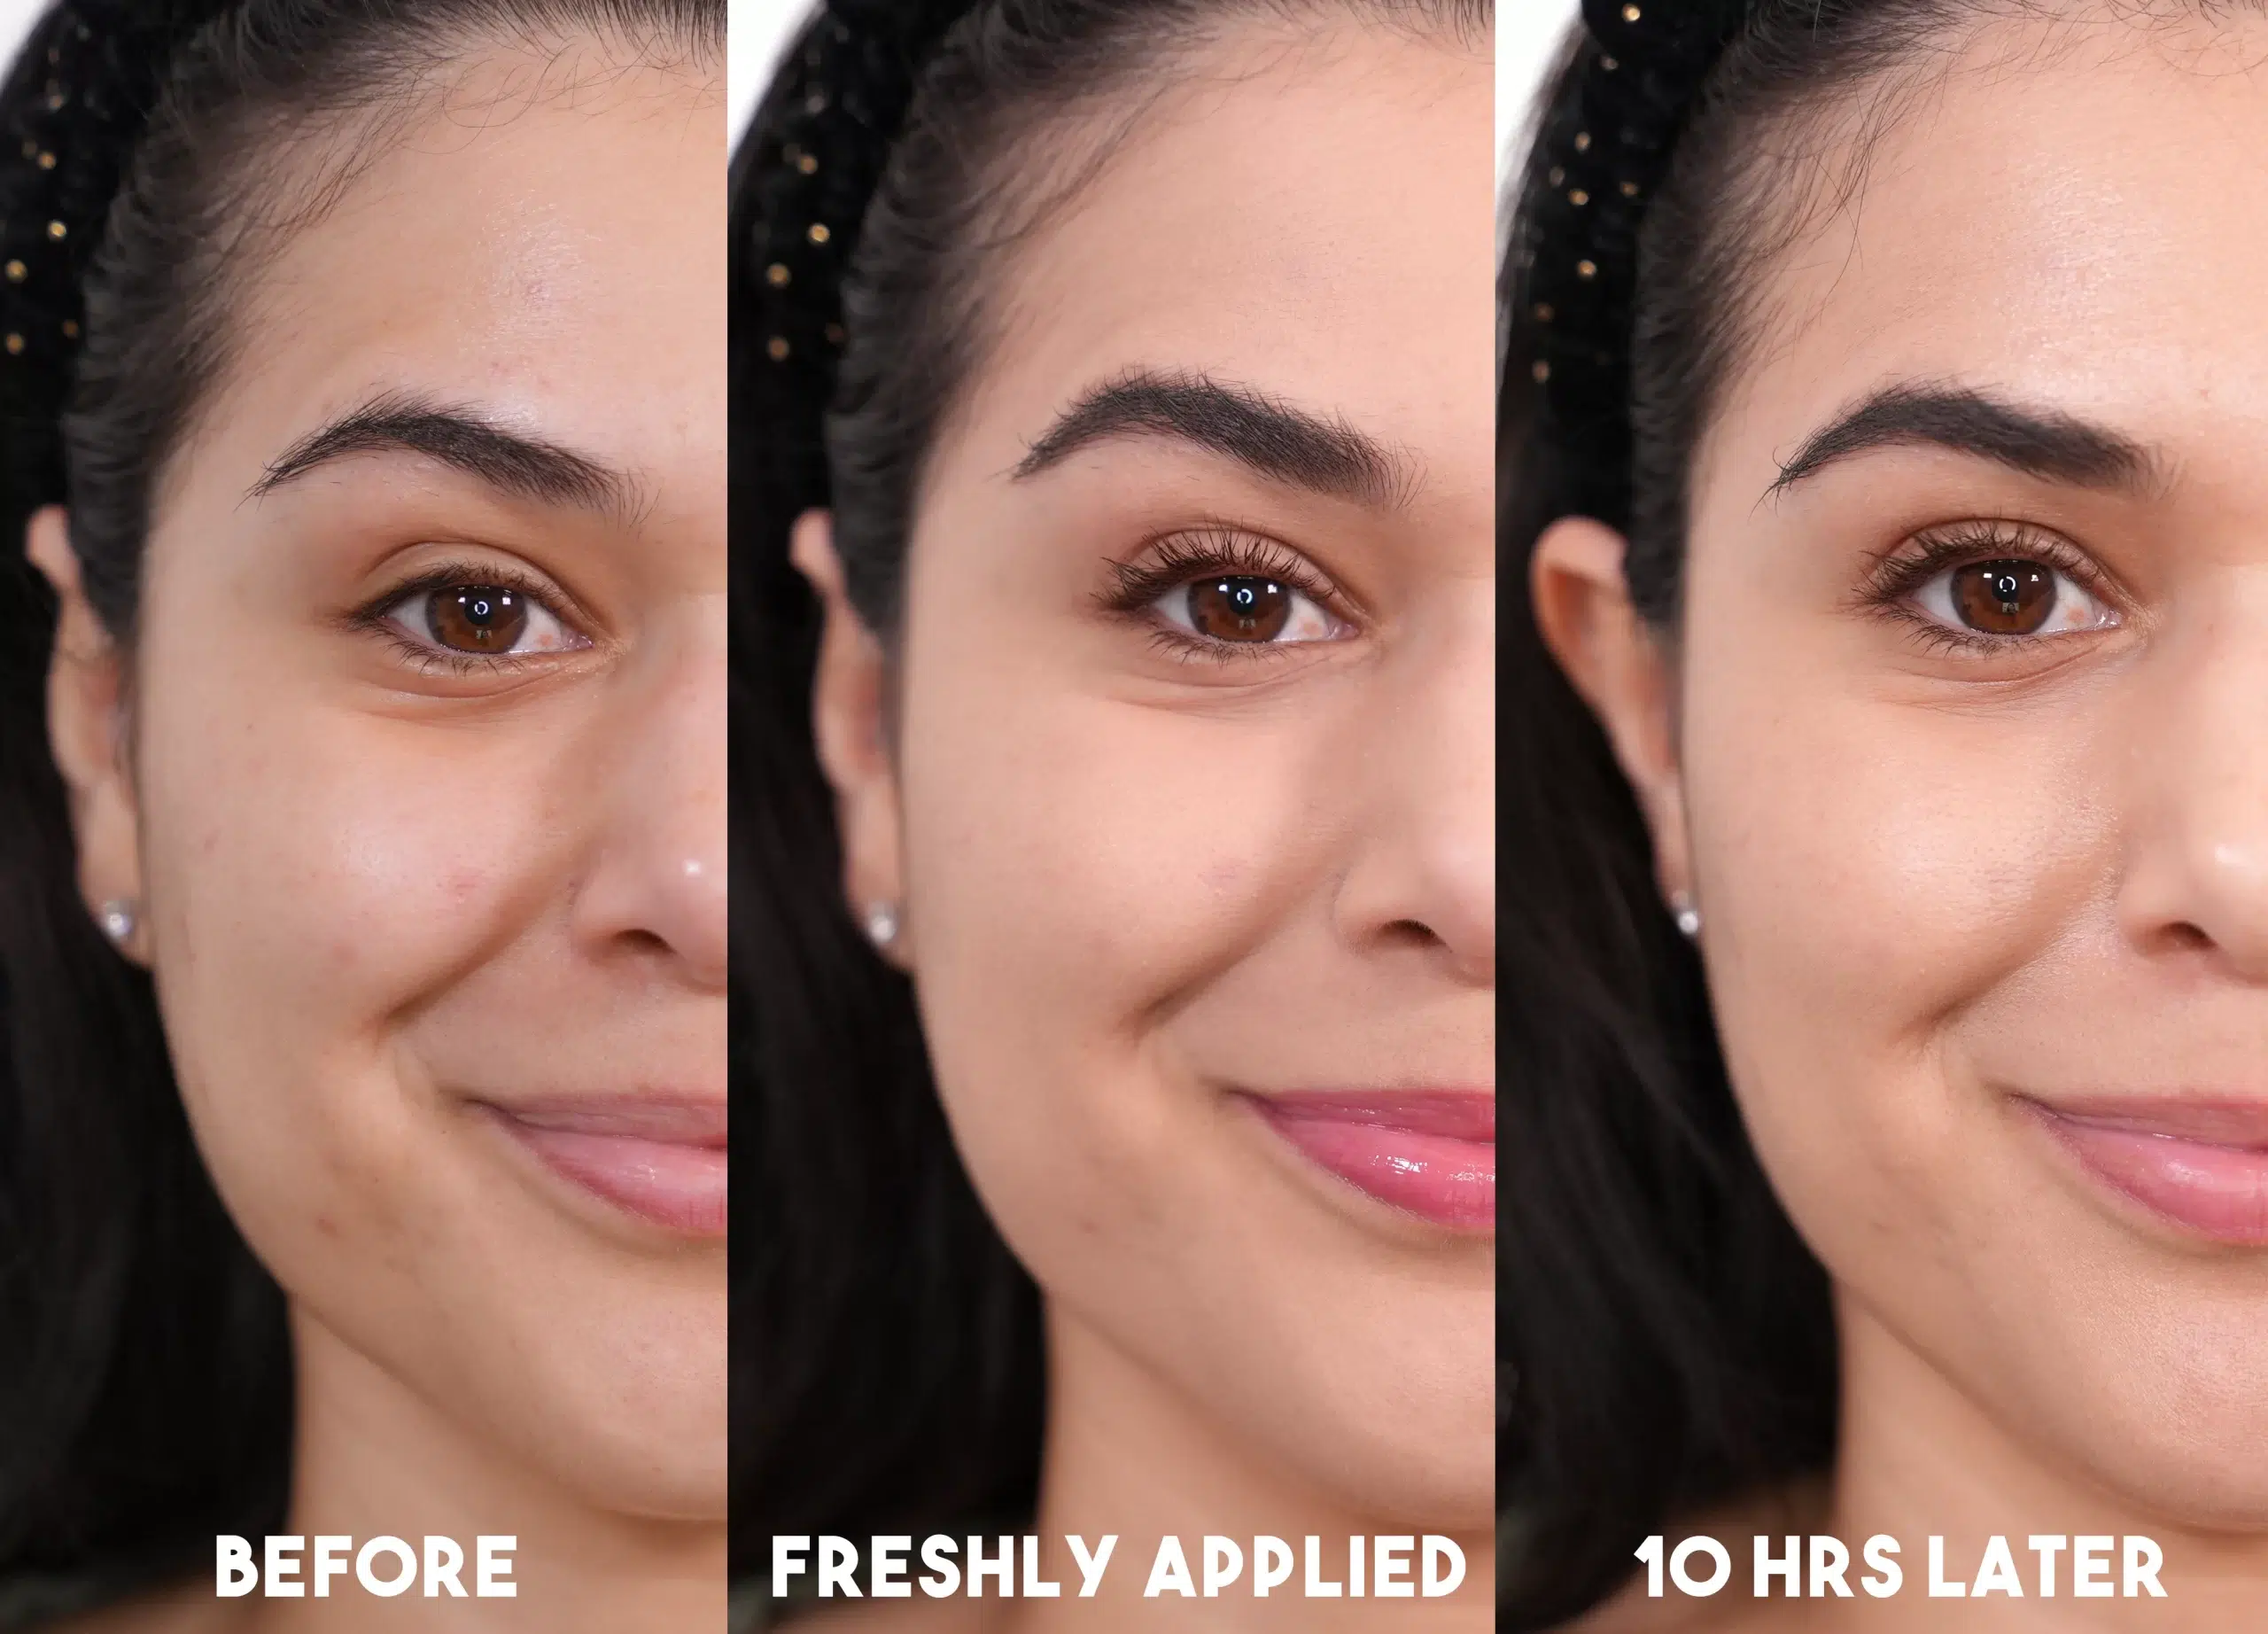 Side by side comparison of bare face next to essence 16h Cover & Last Powder Foundation freshly applied, then 10 hours later. | Top 4 Drugstore Powder Foundations Tested Before & After | Slashed Beauty